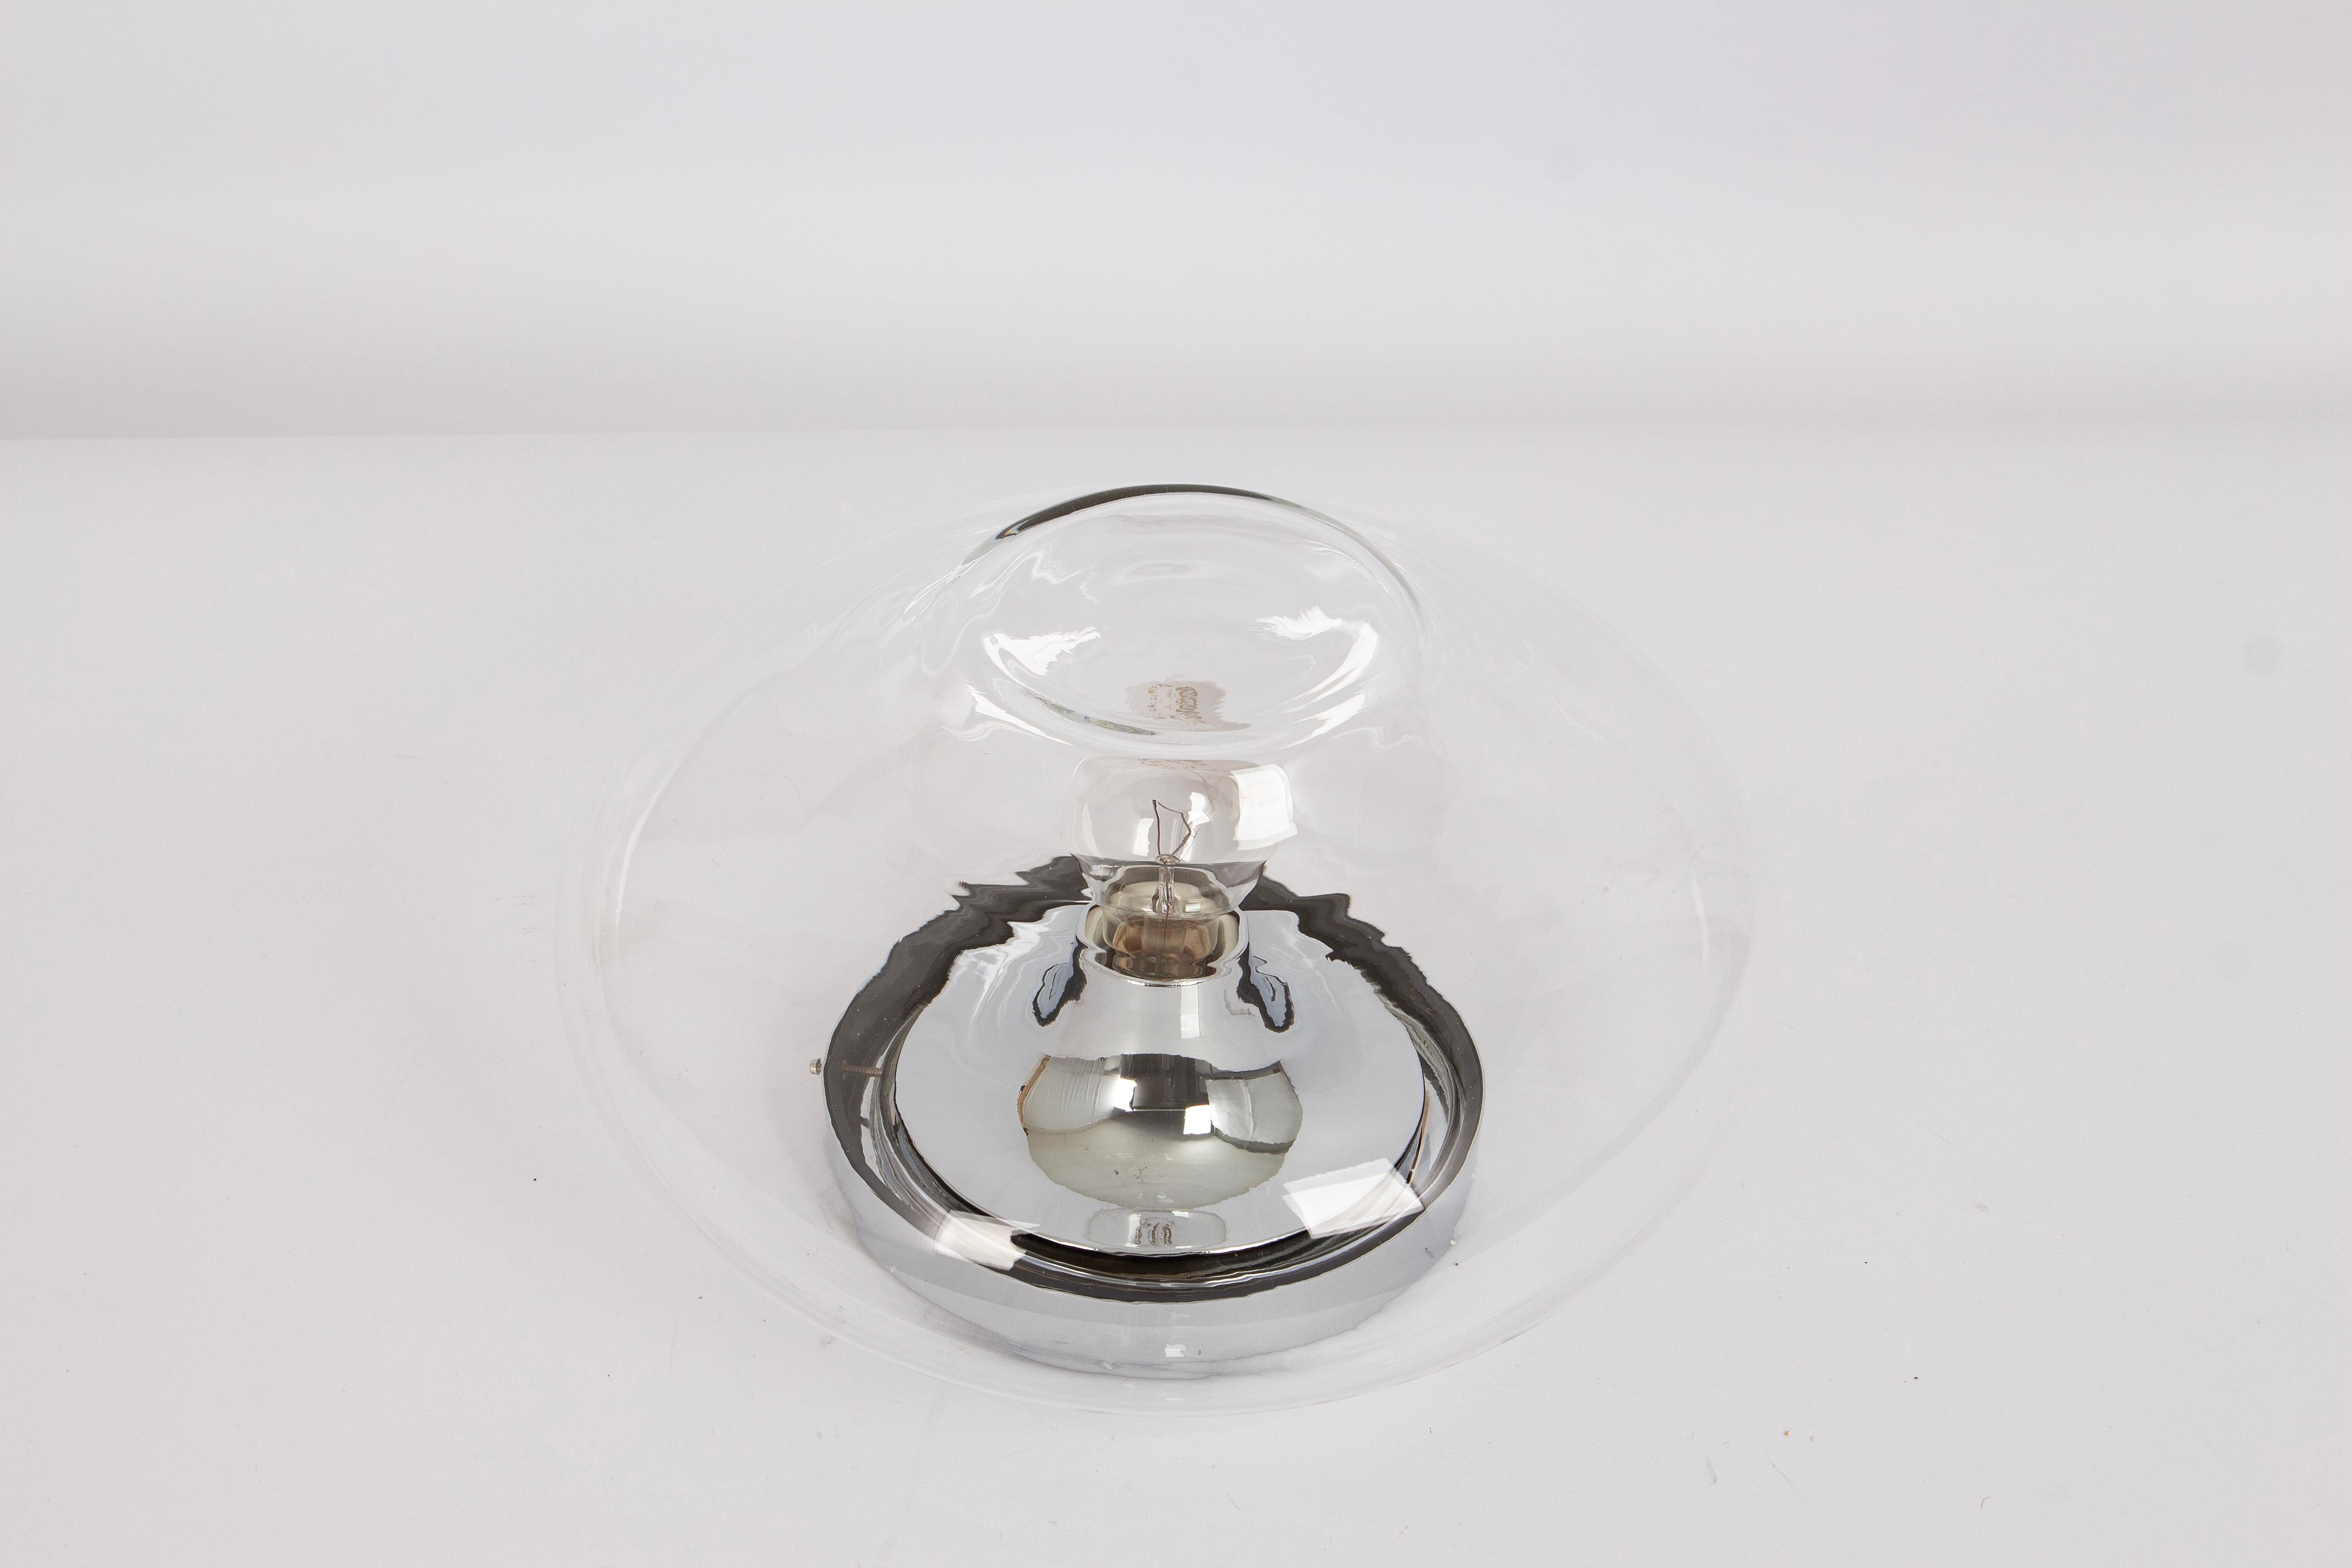 Vintage Sputnik lamps from the 1970s manufactured by Cosack, Germany, 1970s.
This lamp can be used as a ceiling lamp, or as a wall lamp.
Wonderful glass shape and light effect.
Sockets: 1 x E27 standard Bulb.
Light bulbs are not included. It is